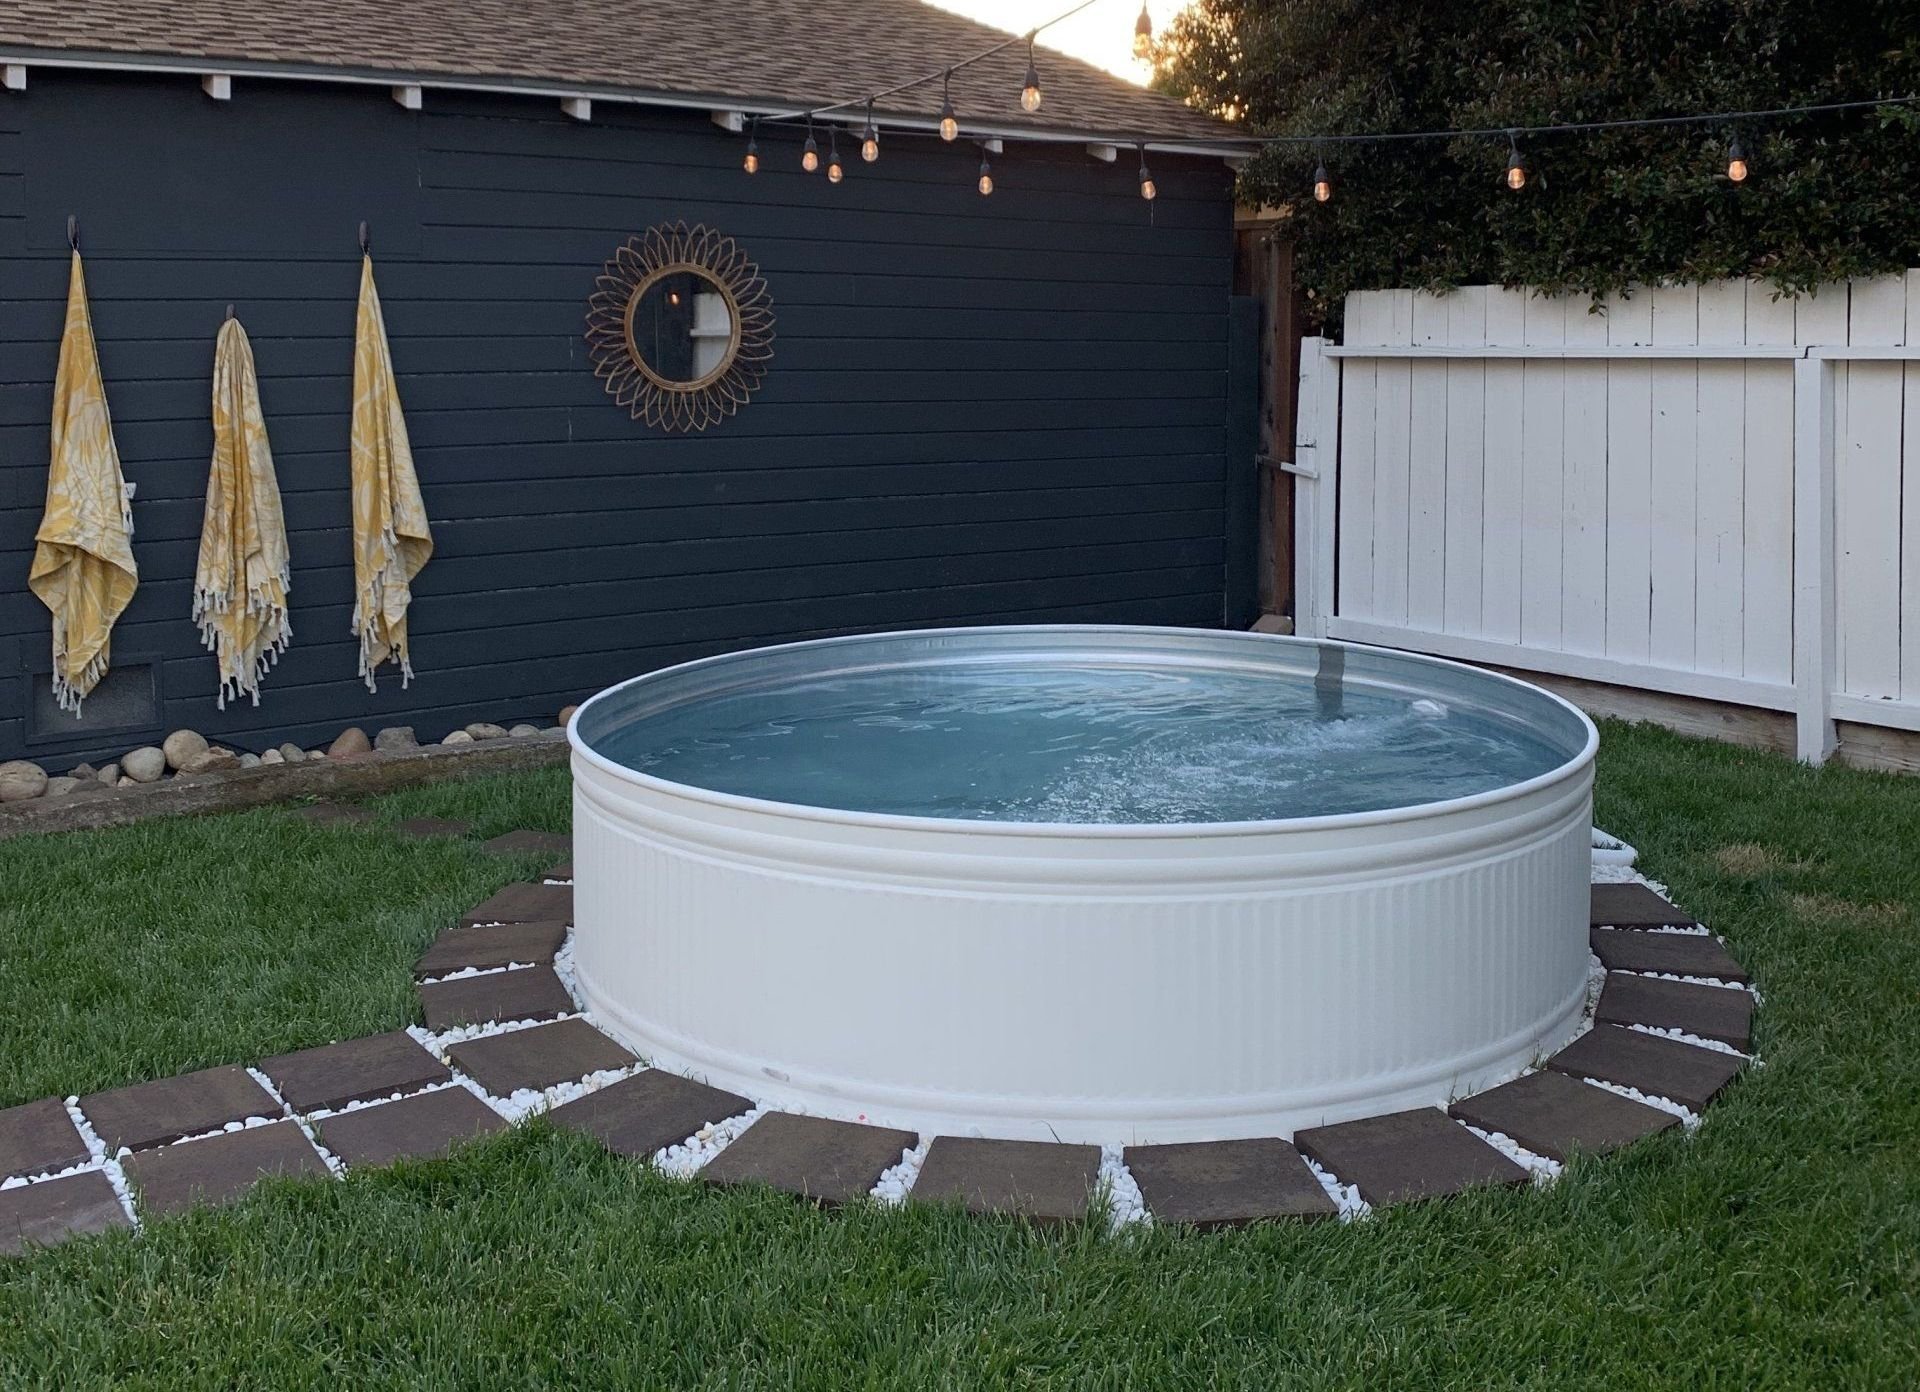 A traditional style backyard with a stock tank pool painted white surrounded by green lawn and overhead string lights